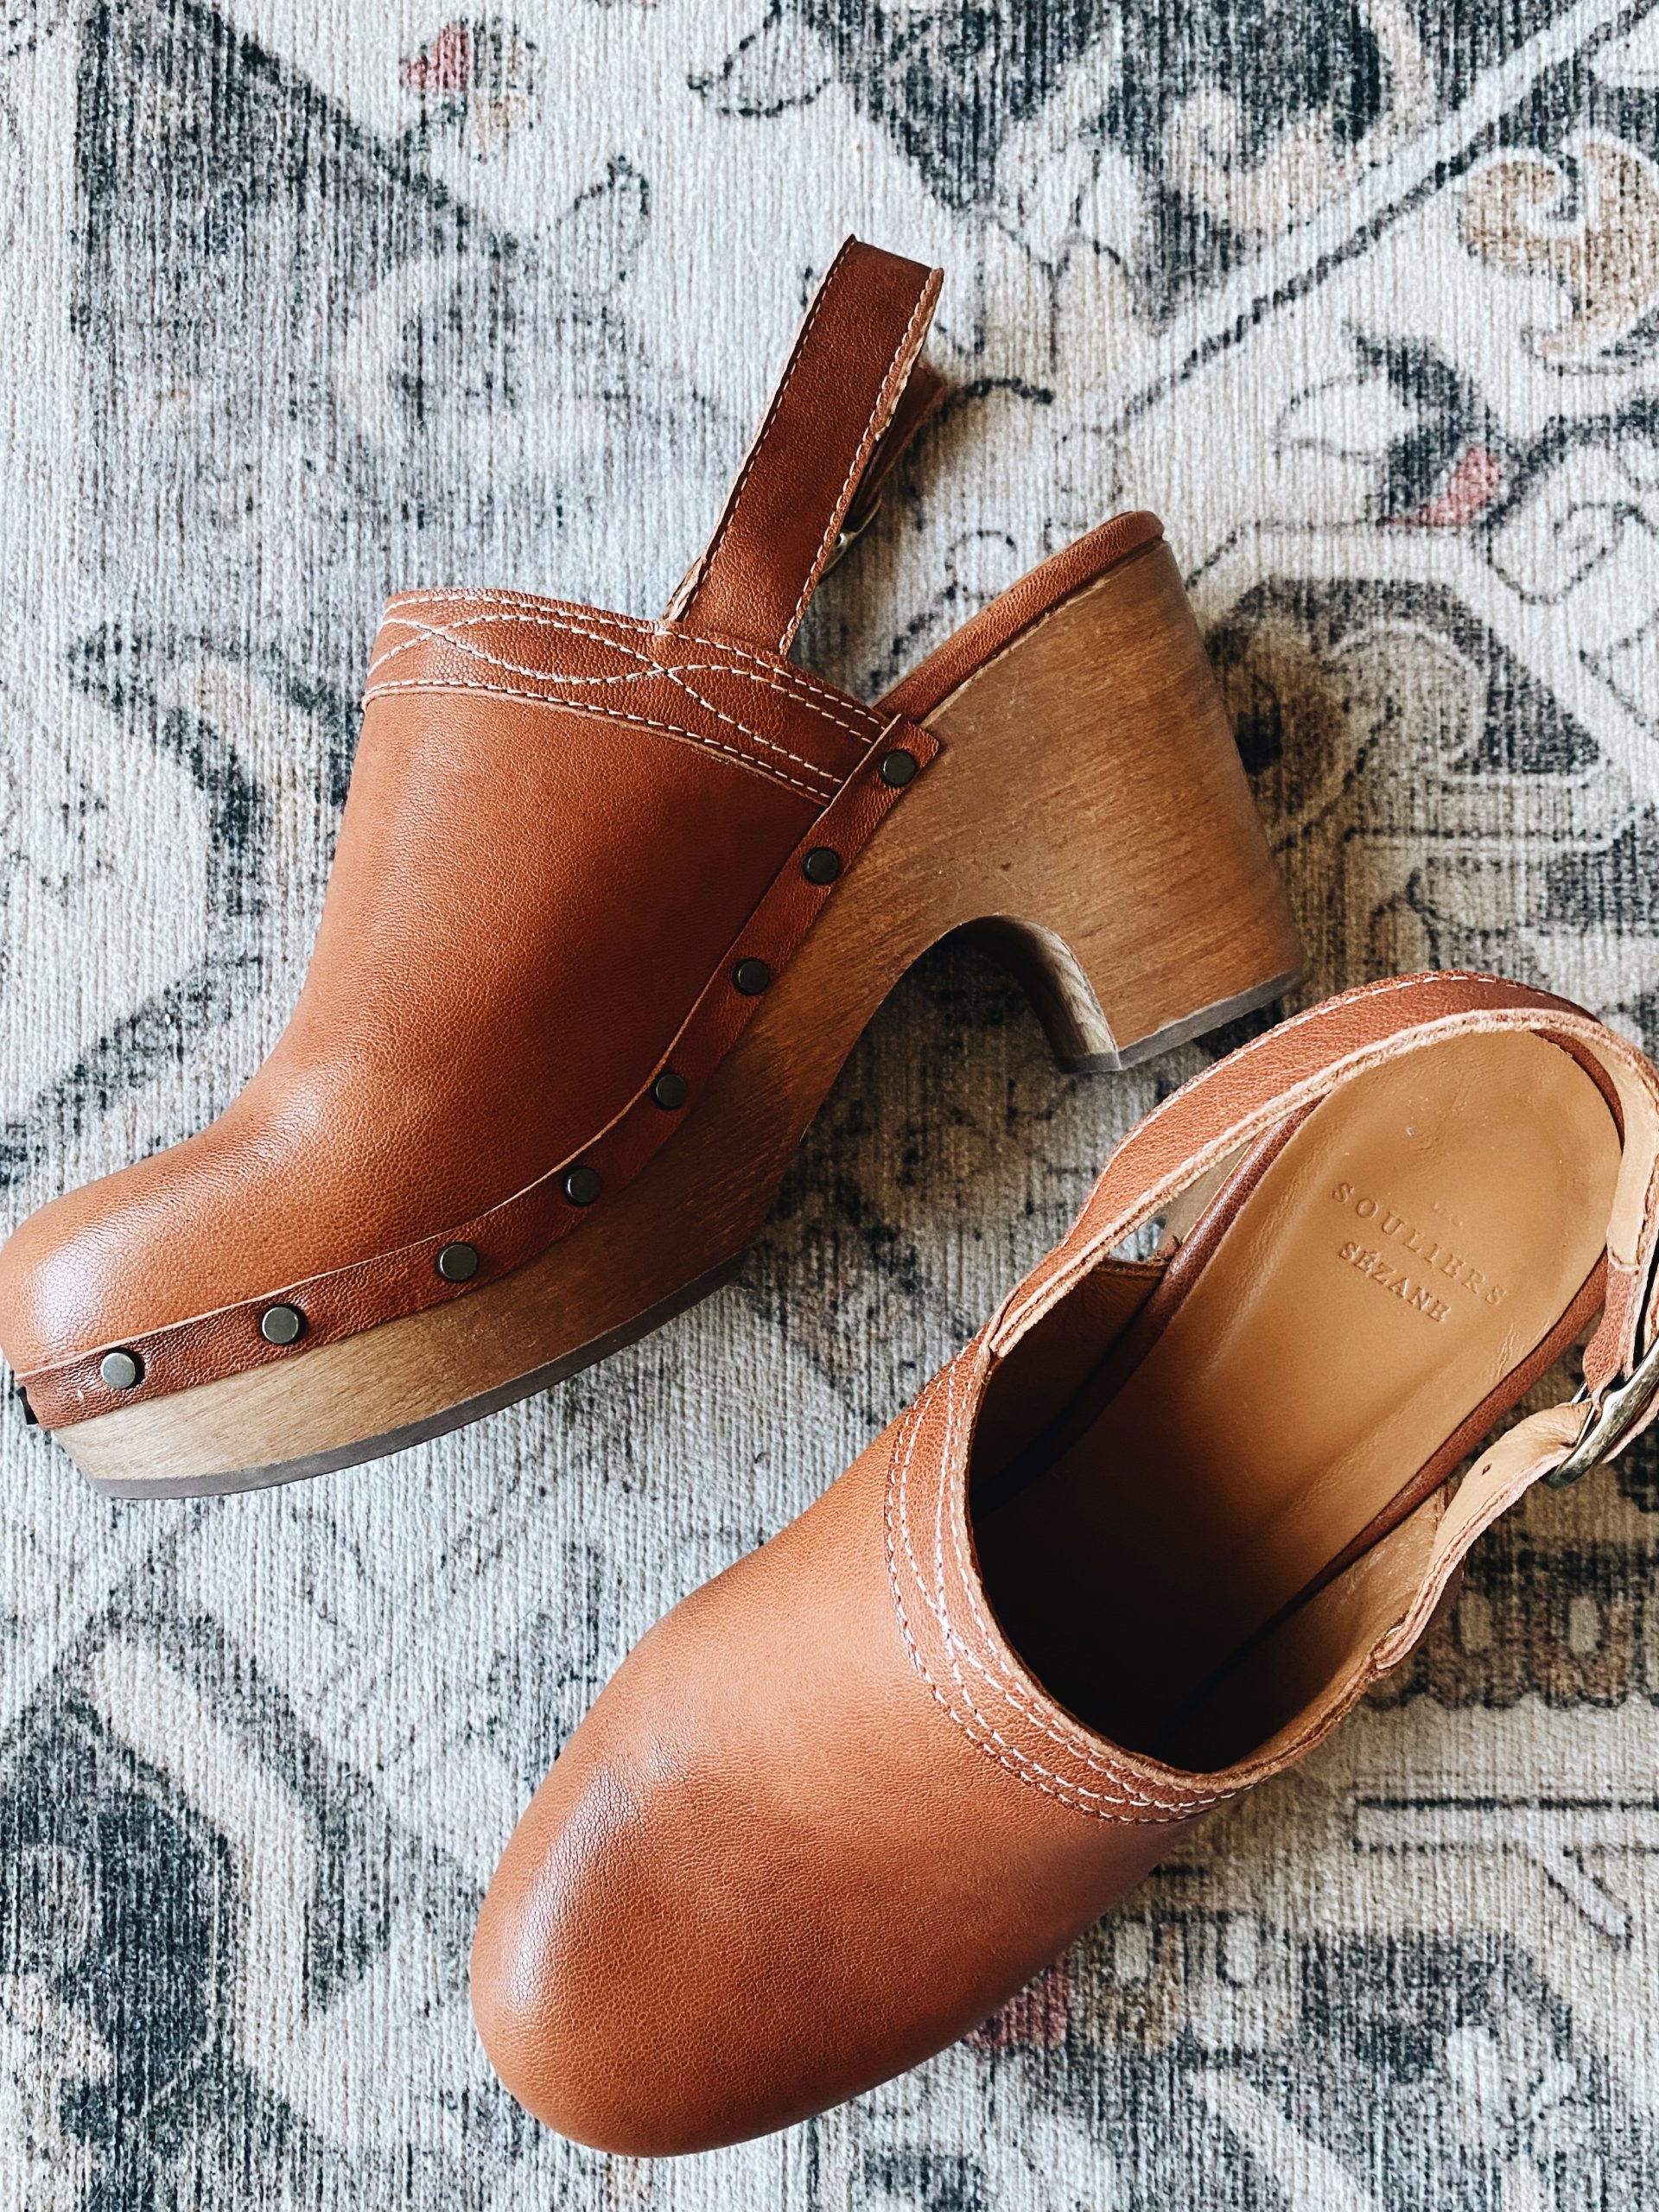 30 Best Clogs From The Fall Trend That's Making Us Nostalgic